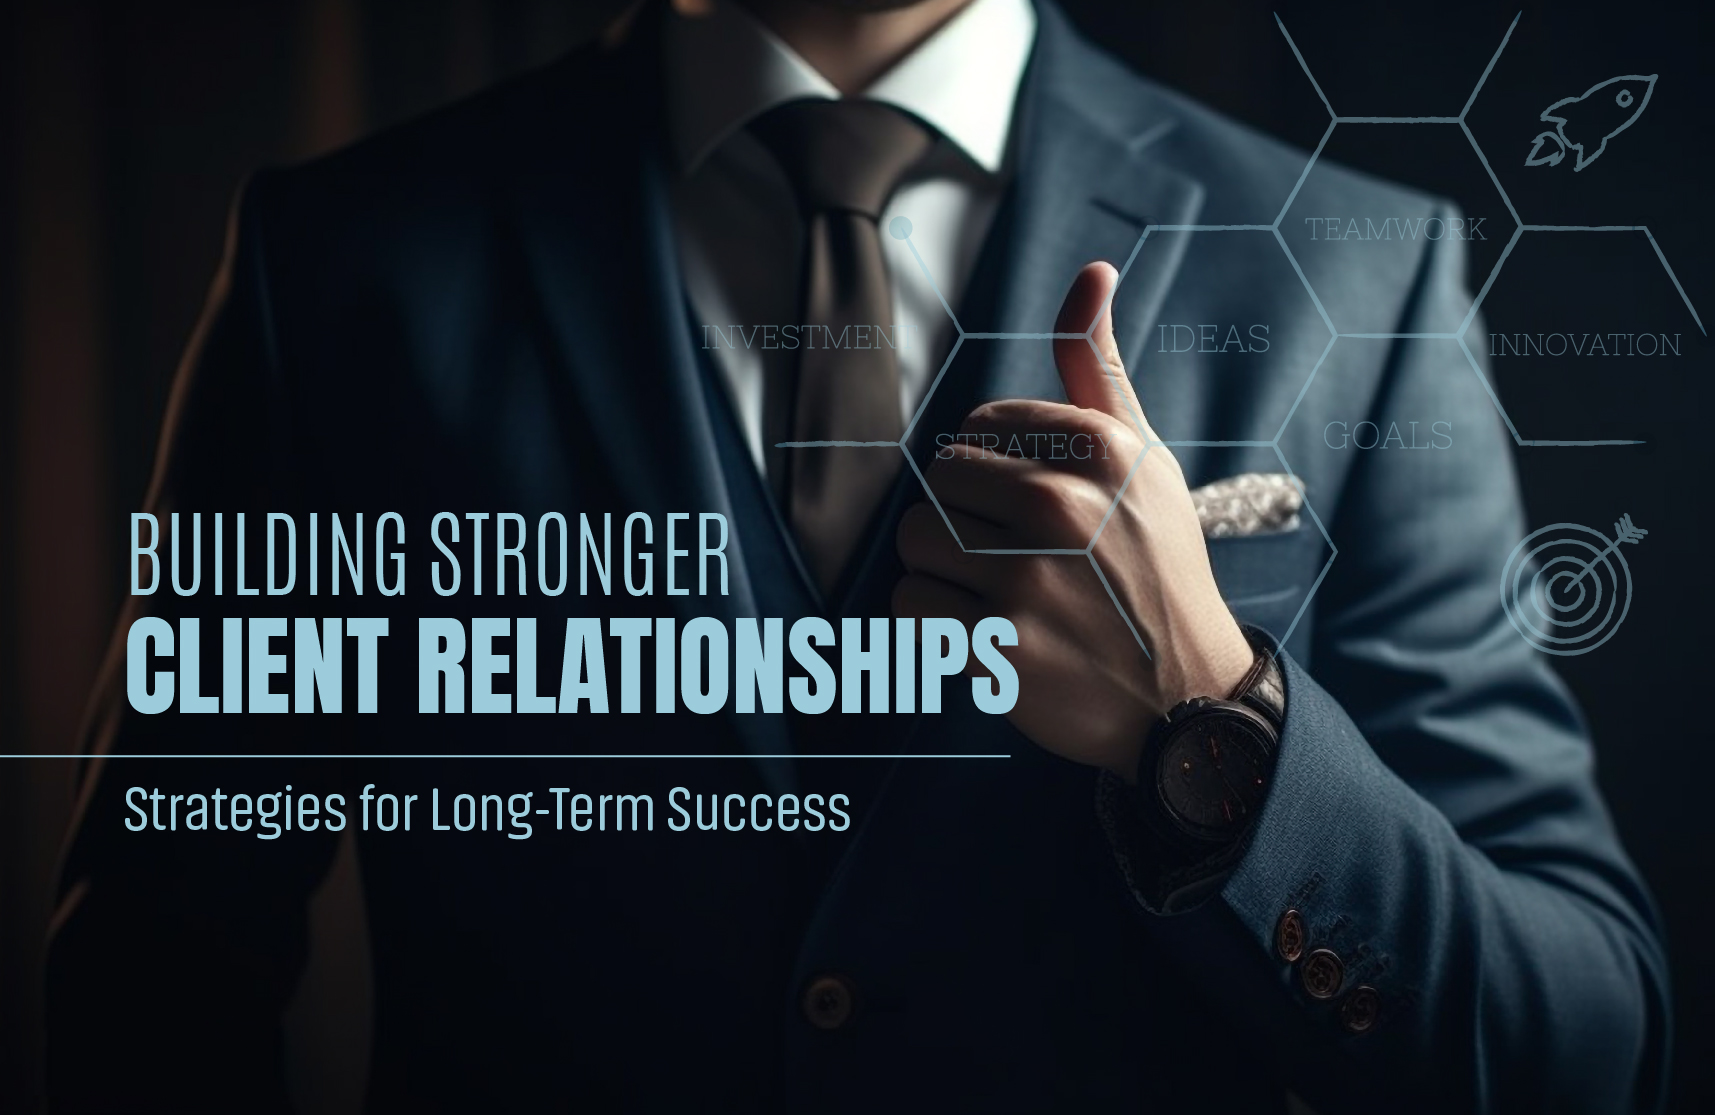 Building Stronger Client Relationships: Strategies for Long-Term Success